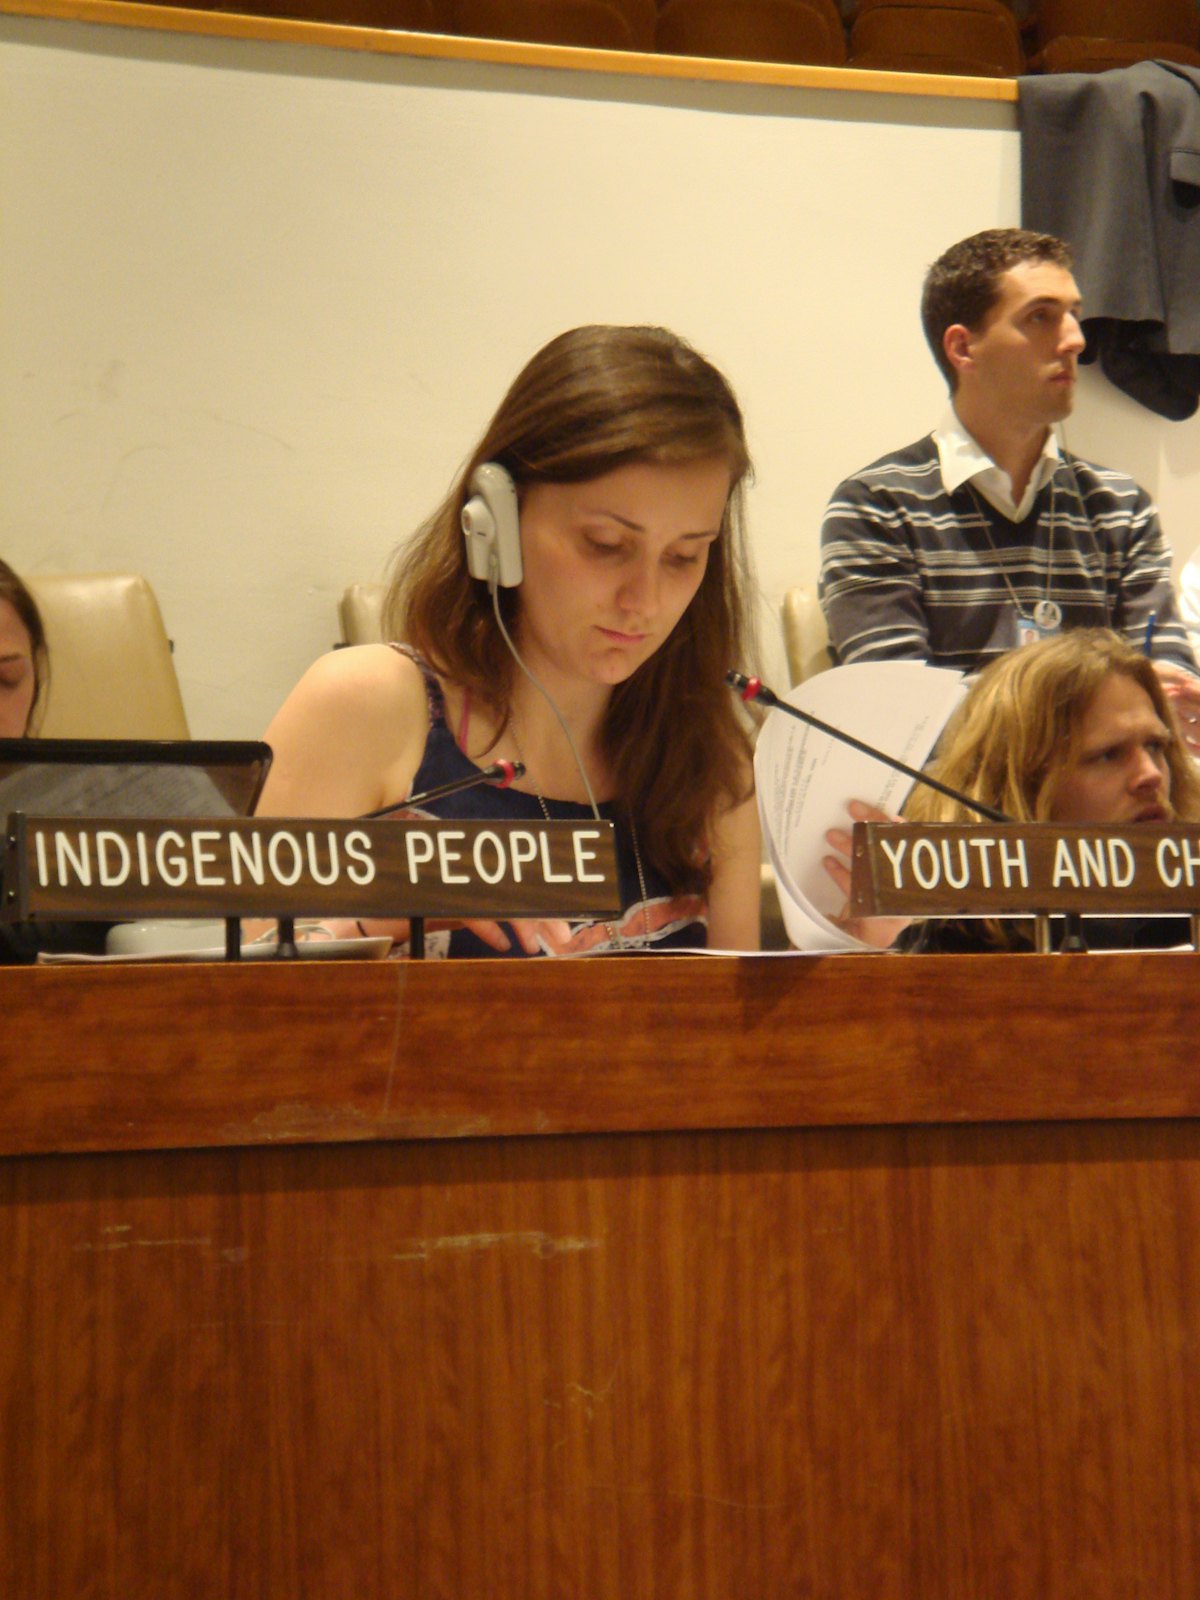 Alicia Cundall, 19, one of the Baha'i representatives at the U.N. Commission on Sustainable Development, read the statement prepared by the youth caucus for the plenary session of governments on 14 May.